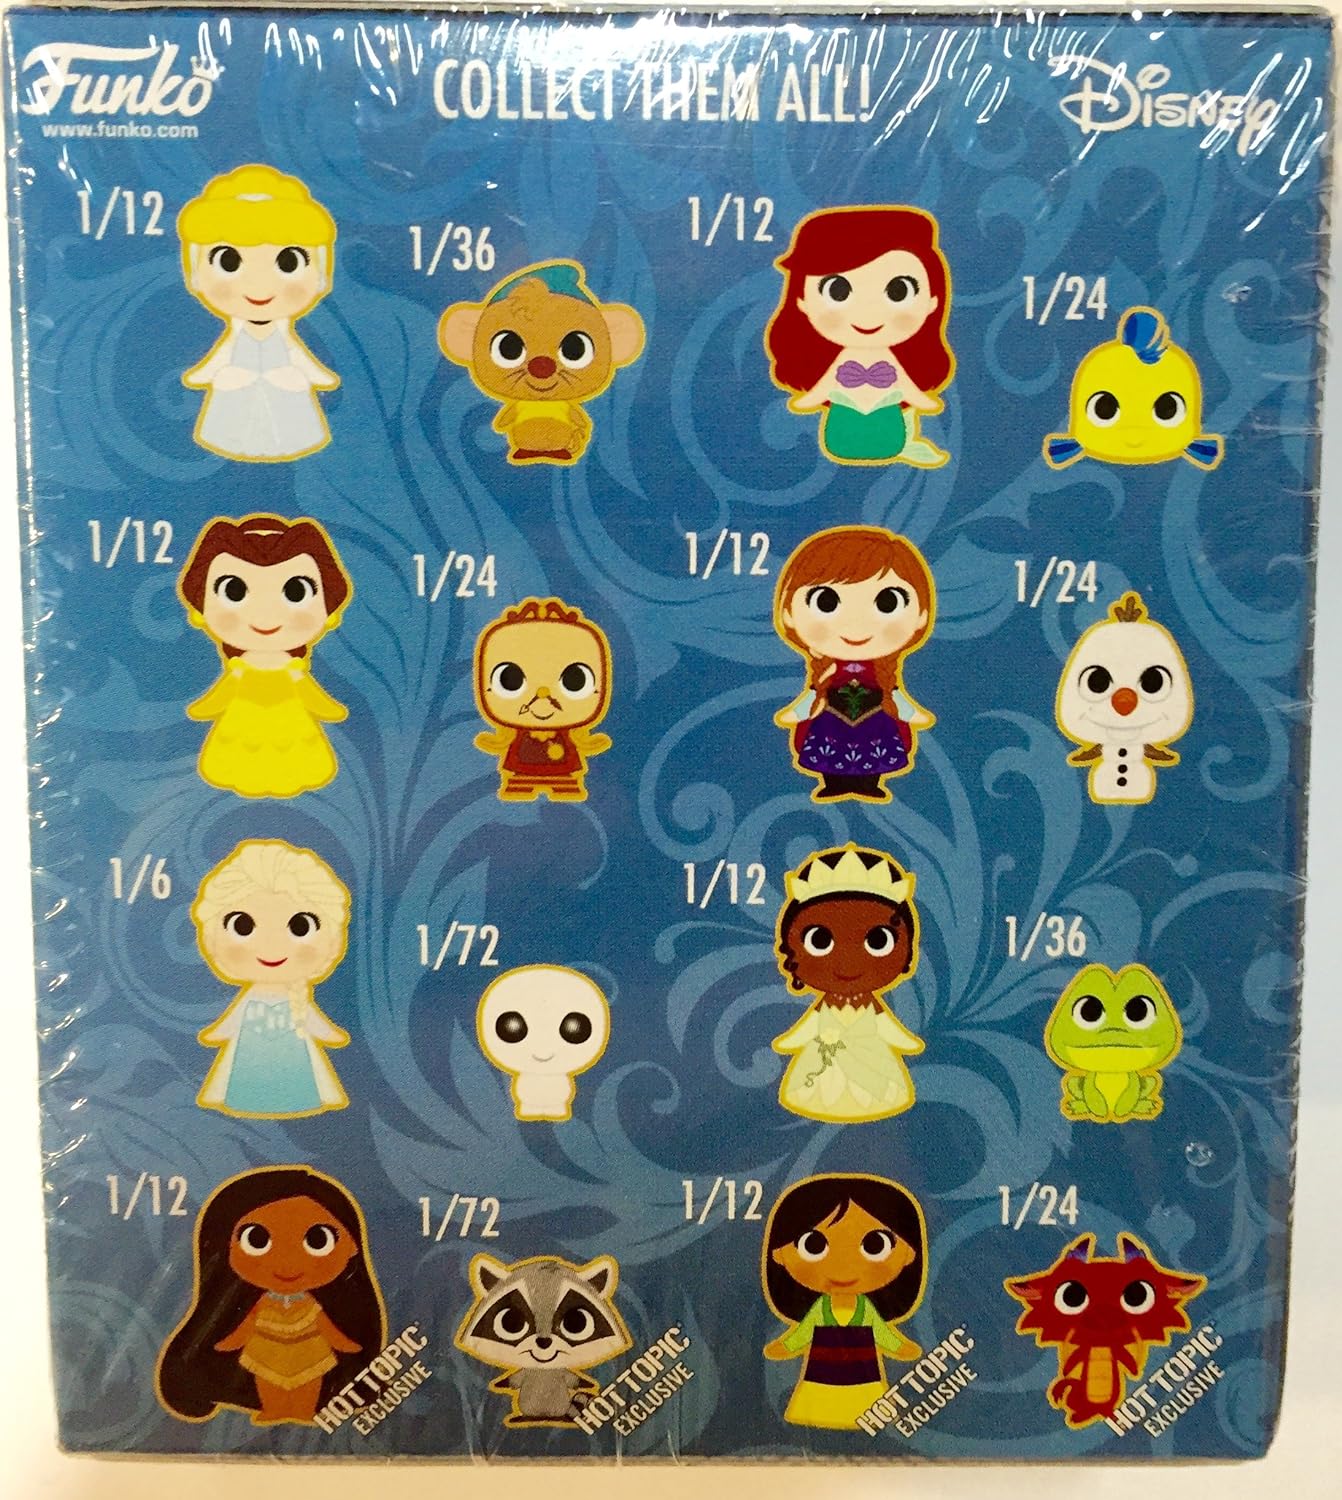 Are These Mystery Minis Your New Favorite Disney Princesses. - Introducing Funko